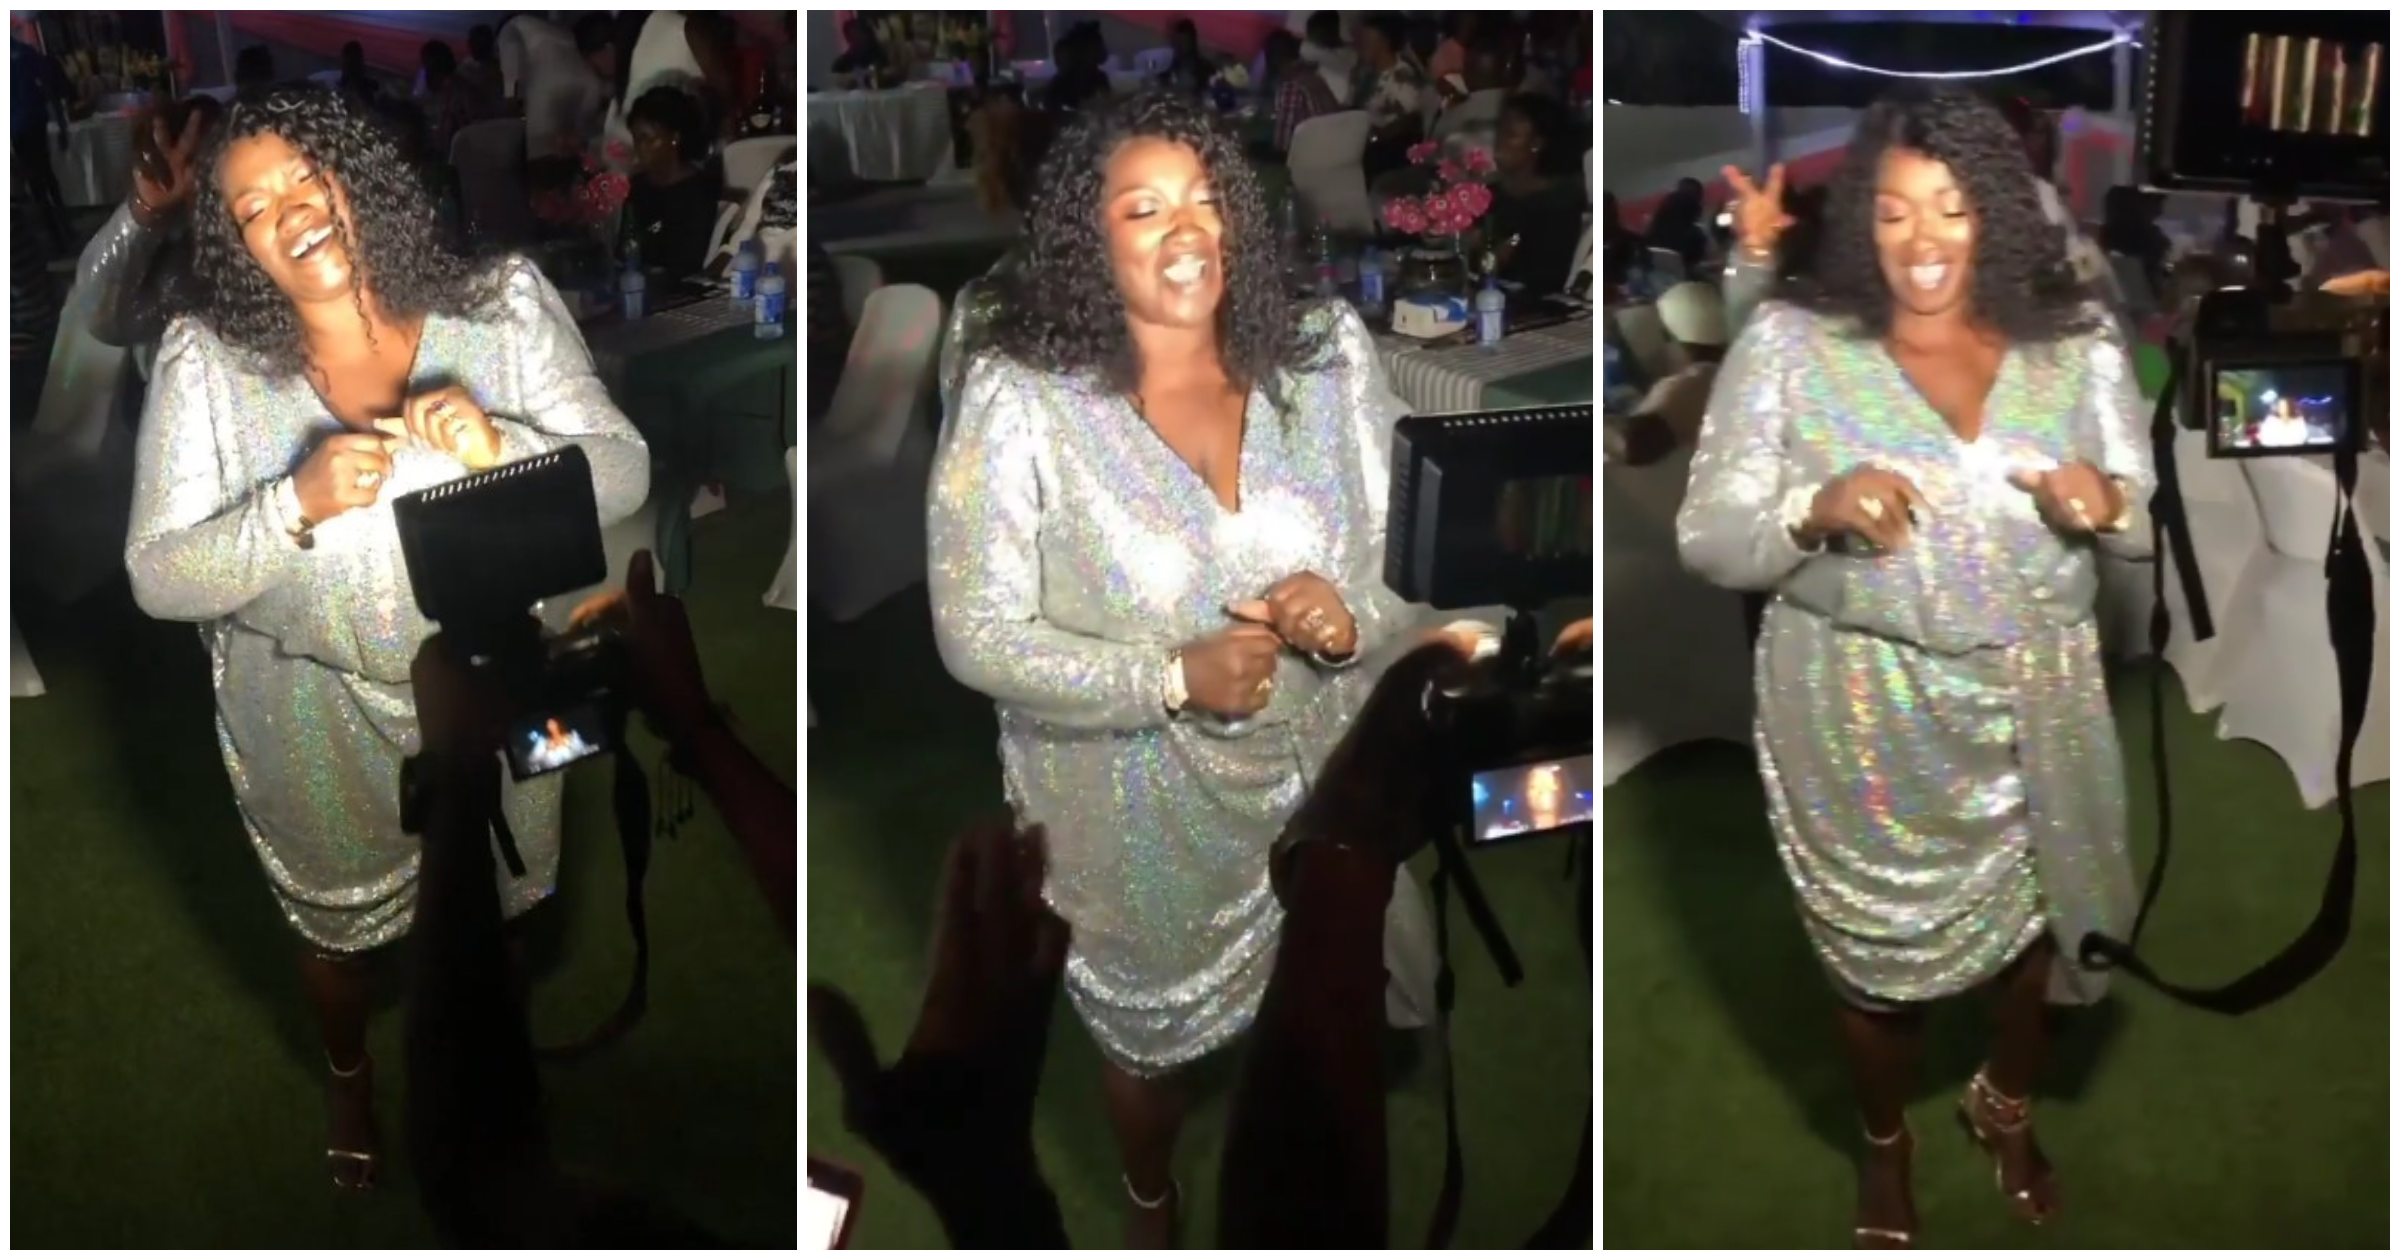 Ebony's mother stuns at daughter's '25th birthday' party as she shows off silky dance moves in high heels, video warms hearts